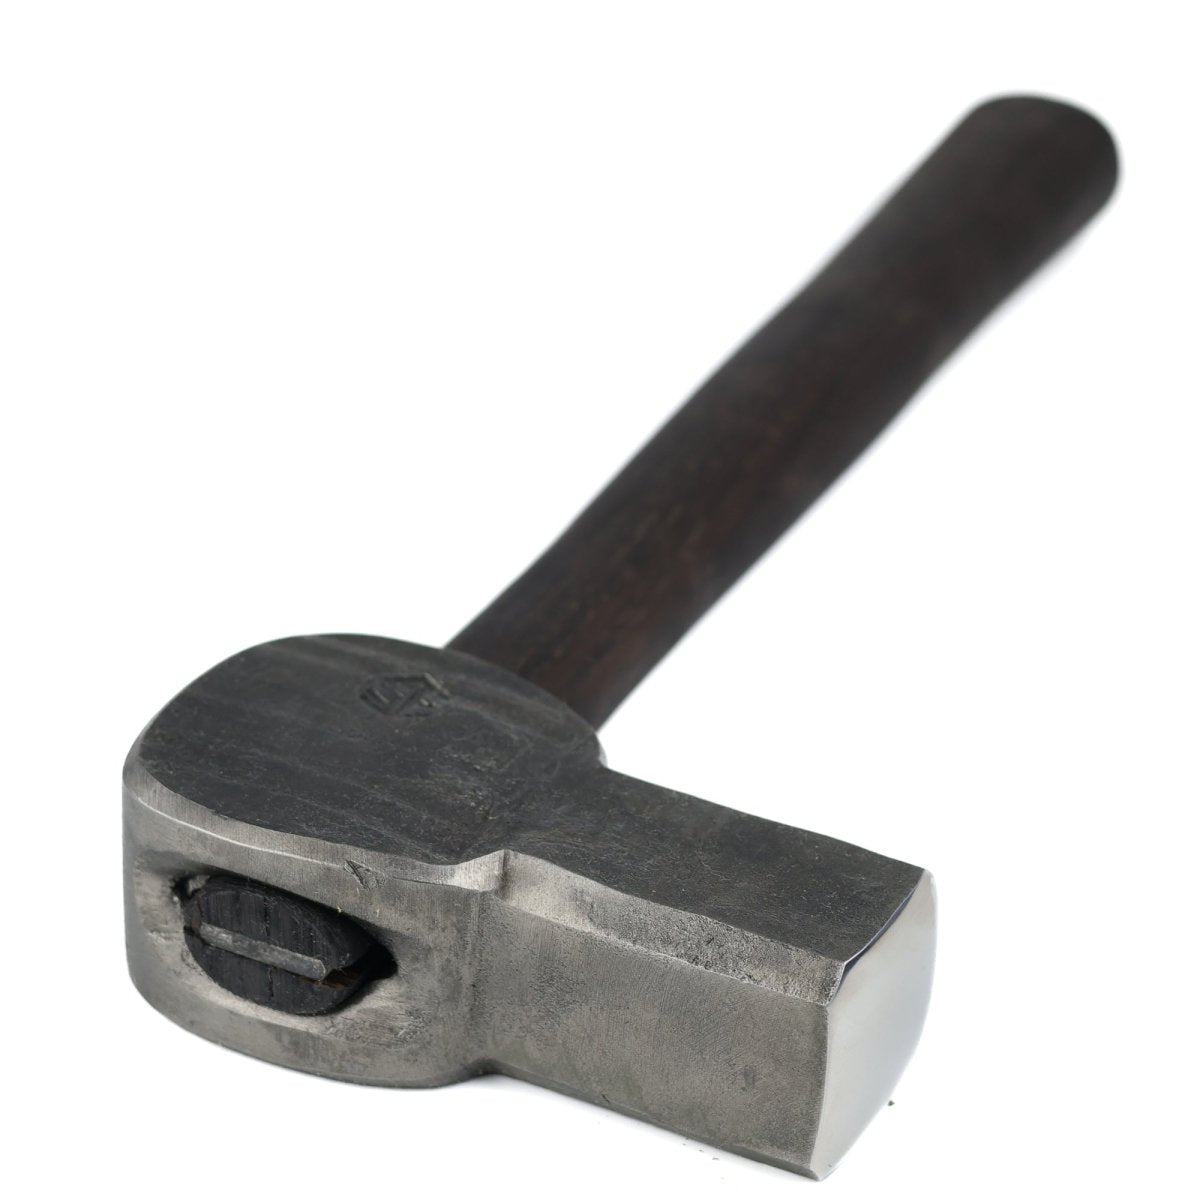 Dog Head hammer for blacksmithing from AncientSmithy